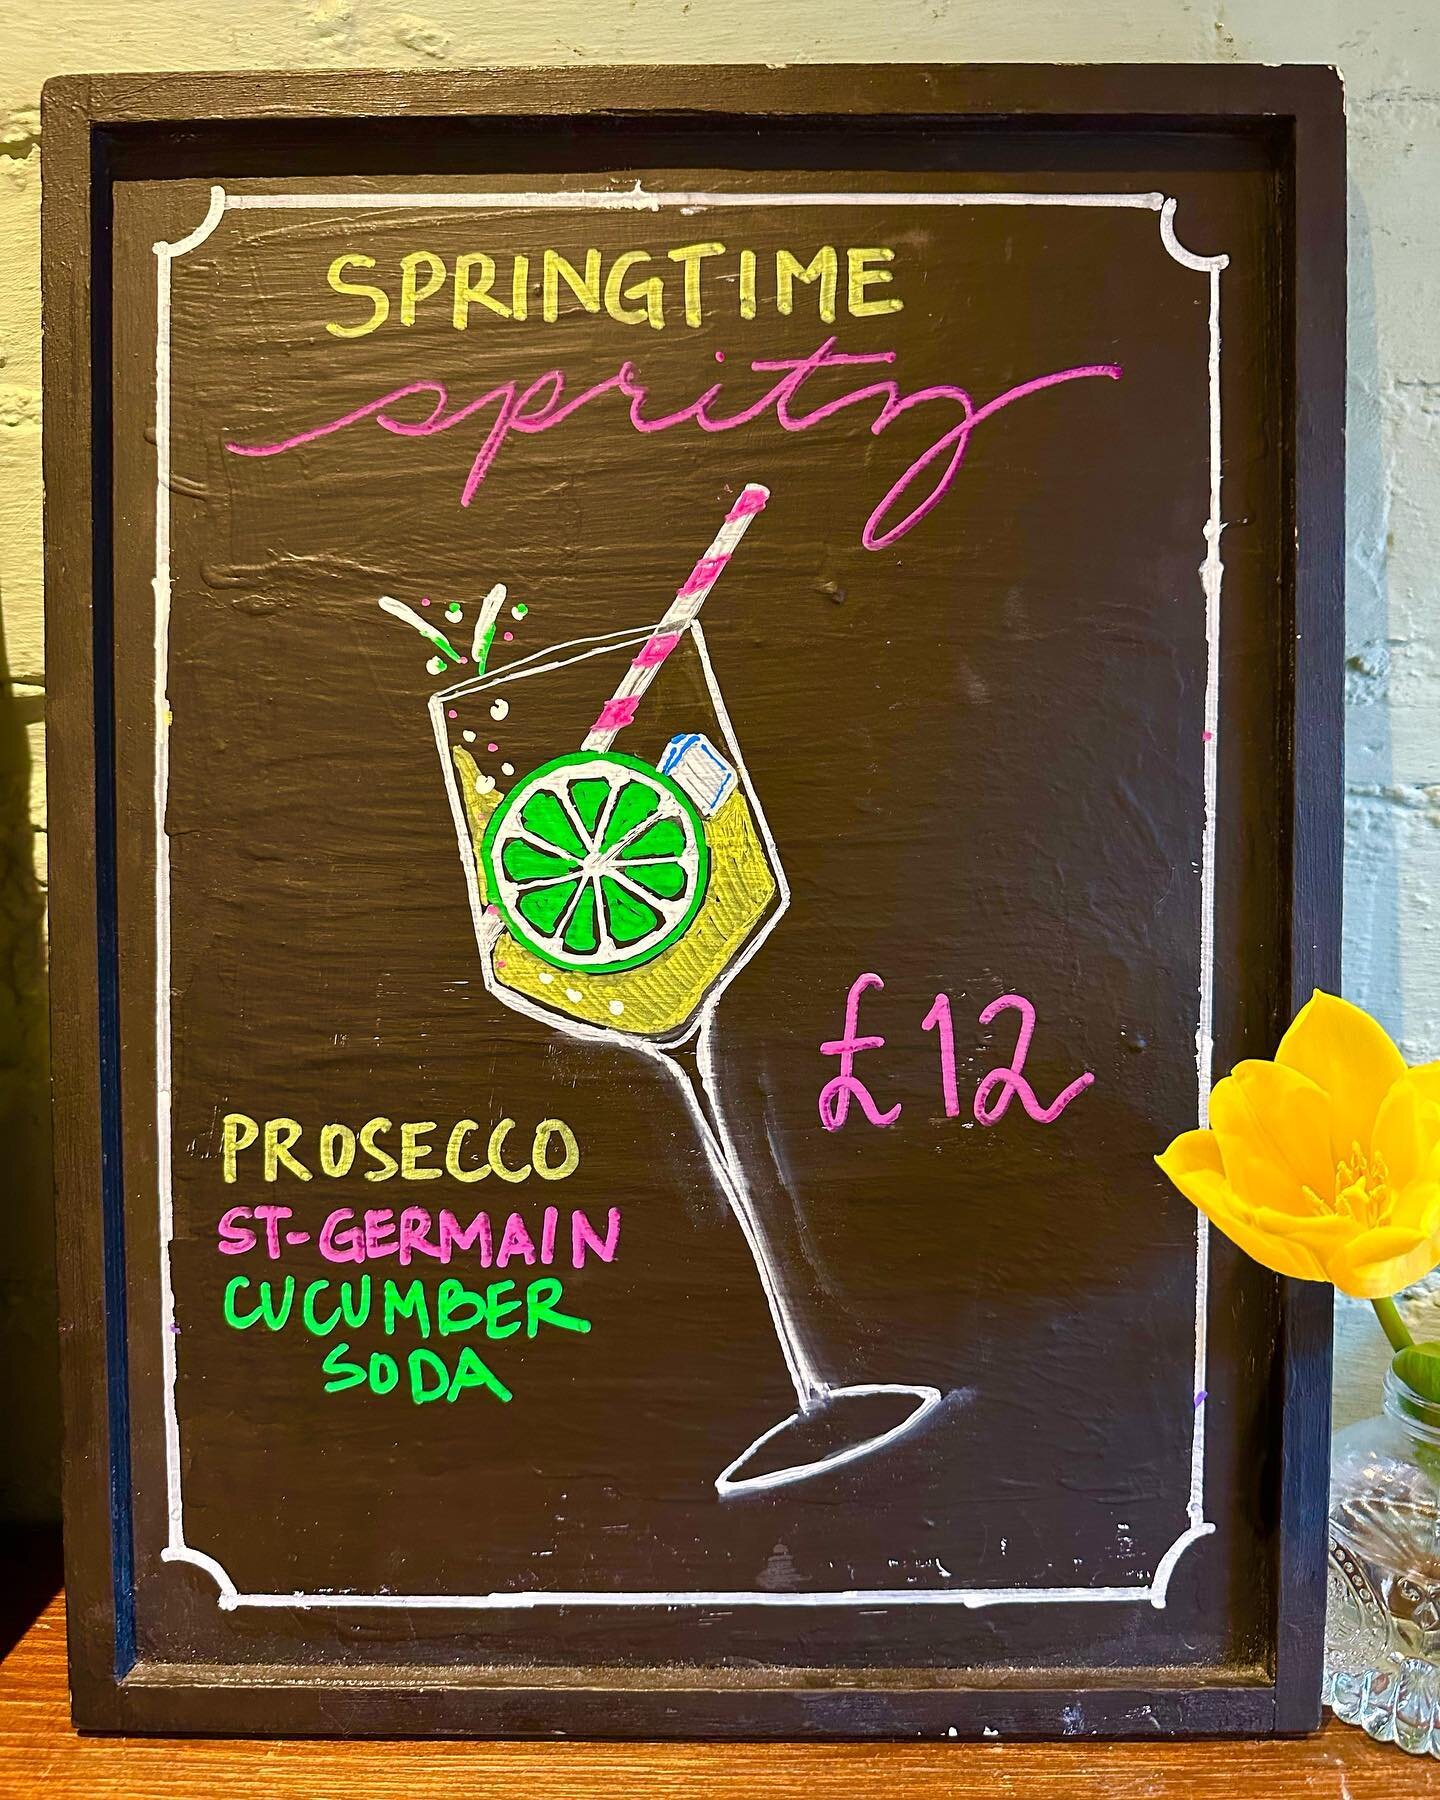 Who&rsquo;s ready for Spring! 🙋🏻&zwj;♀️
🌸🌼🌷🌻
#spritz 
#seasonal
#cocktailofthemonth 
#prosecco 
#stgermain